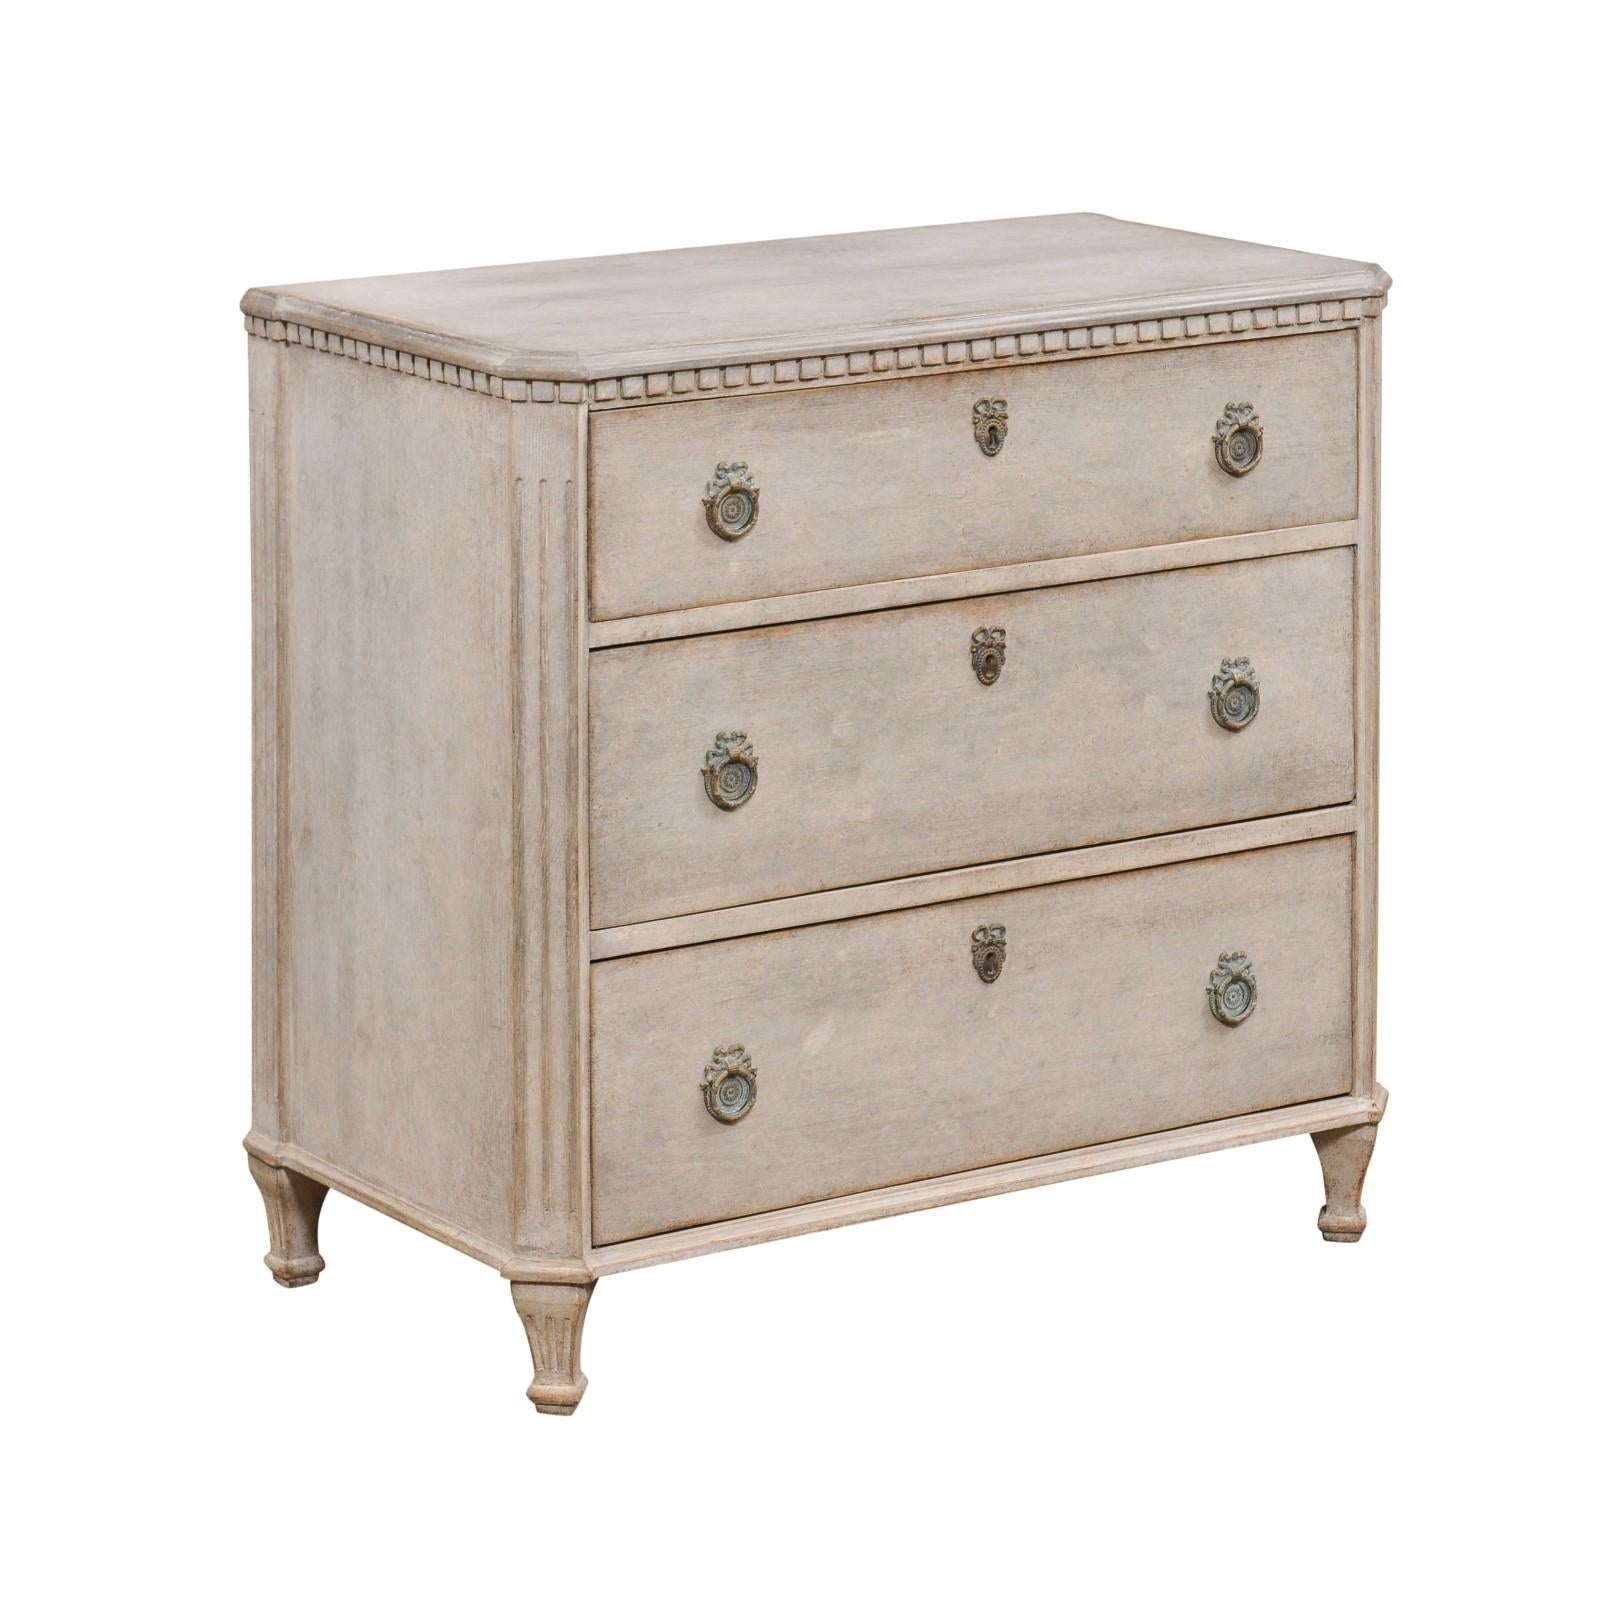 Swedish 19th Century Gustavian style three-drawer painted wood chest with carved dentil molding and fluted side posts. Immerse yourself in the charm of Swedish craftsmanship with this 19th Century Gustavian style chest of drawers. This piece